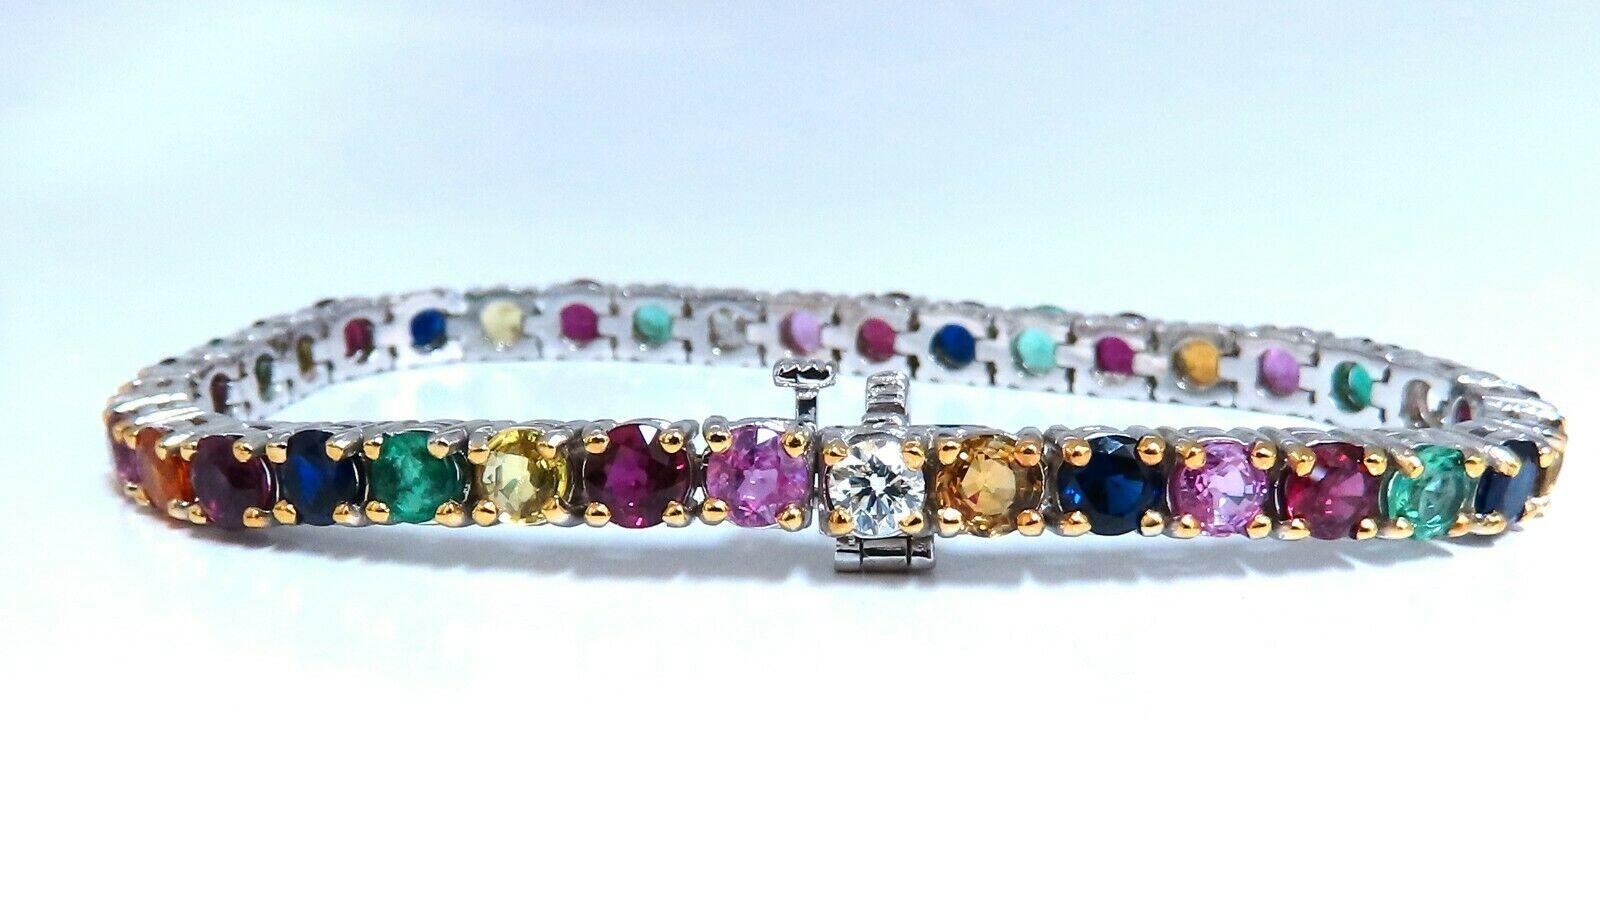 Gem Line.

13ct. Natural Sapphires, Ruby, & Emeralds bracelet.

Full round cuts, great sparkle. Multicolor sapphires.

Vibrant Greens, Orange, Reds, yellows, Blues & Pinks

Clean Clarity & Transparent.


1.02ct natural diamonds (4)

G-cor vs2